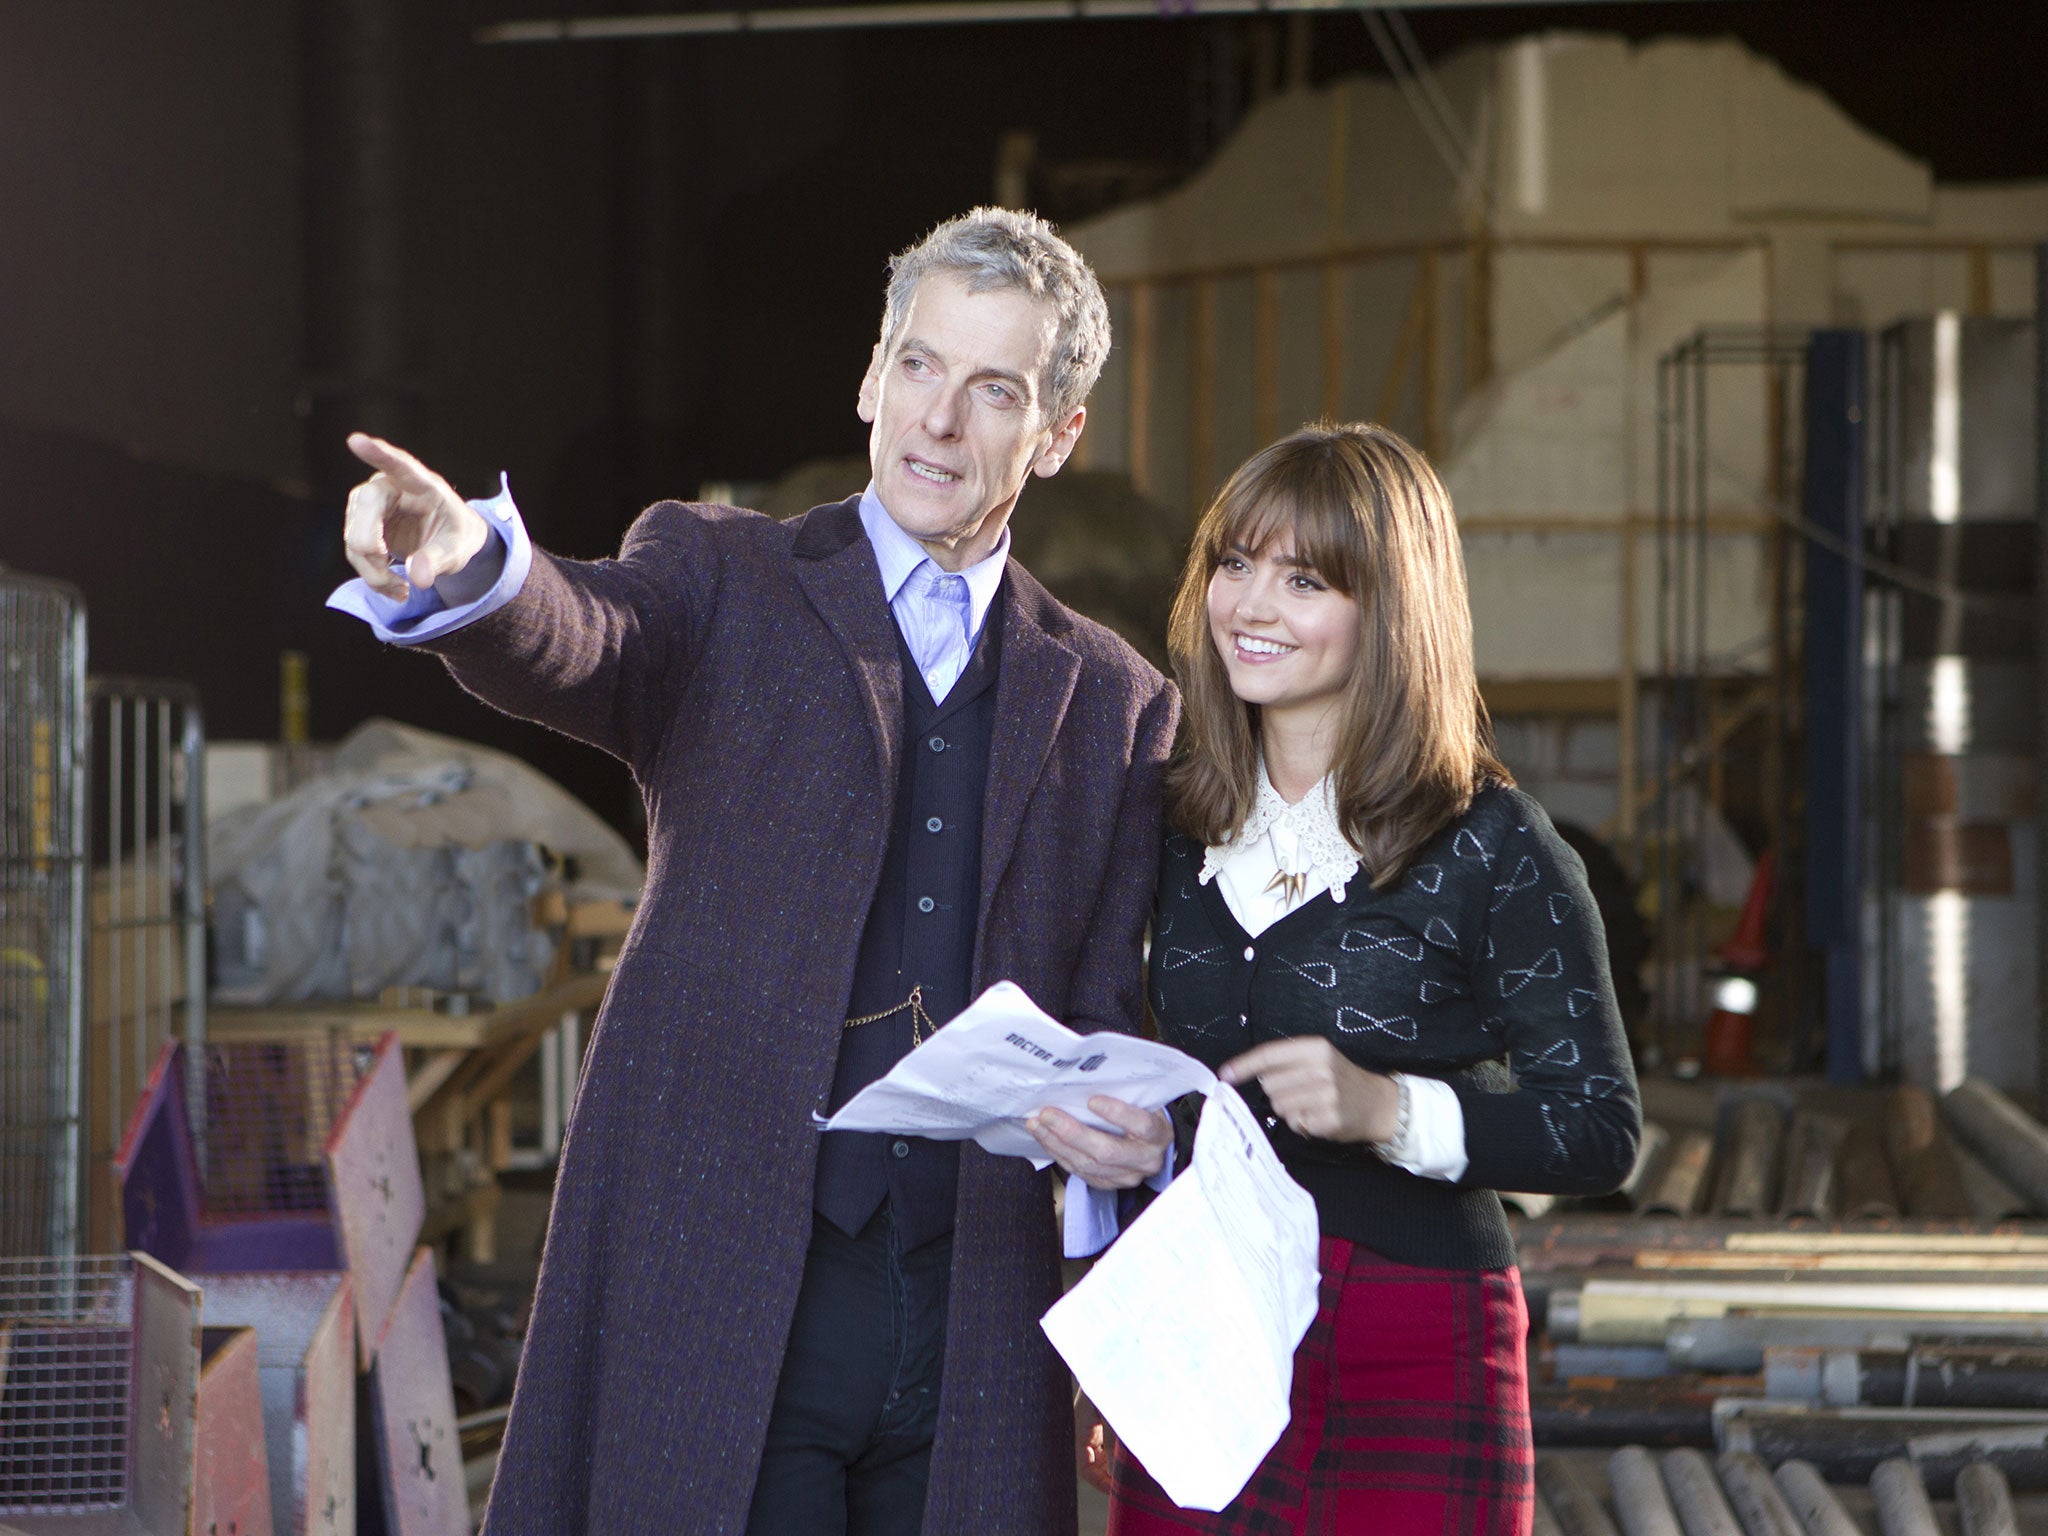 Peter Capaldi and Jenna Coleman star as Doctor Who and Clara